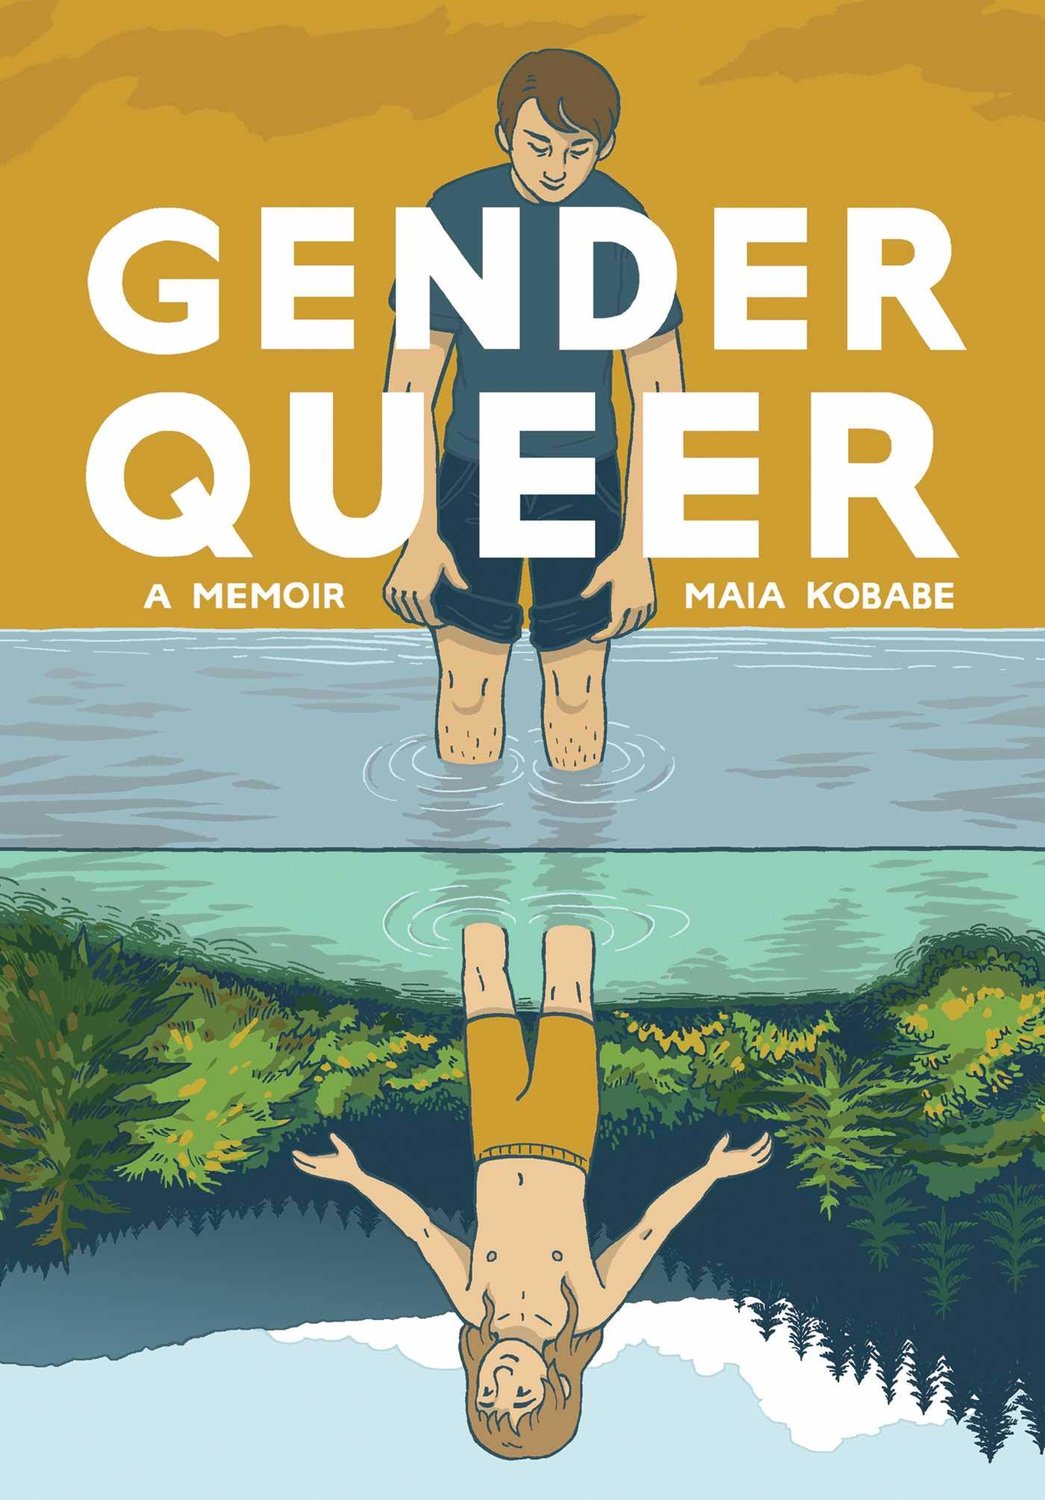 “Gender Queer: A Memoir” is a graphic novel (i.e. comic-book style) that was published in 2019. It has been the focus of many debates nationwide as the novel contains explicit sexual imagery.